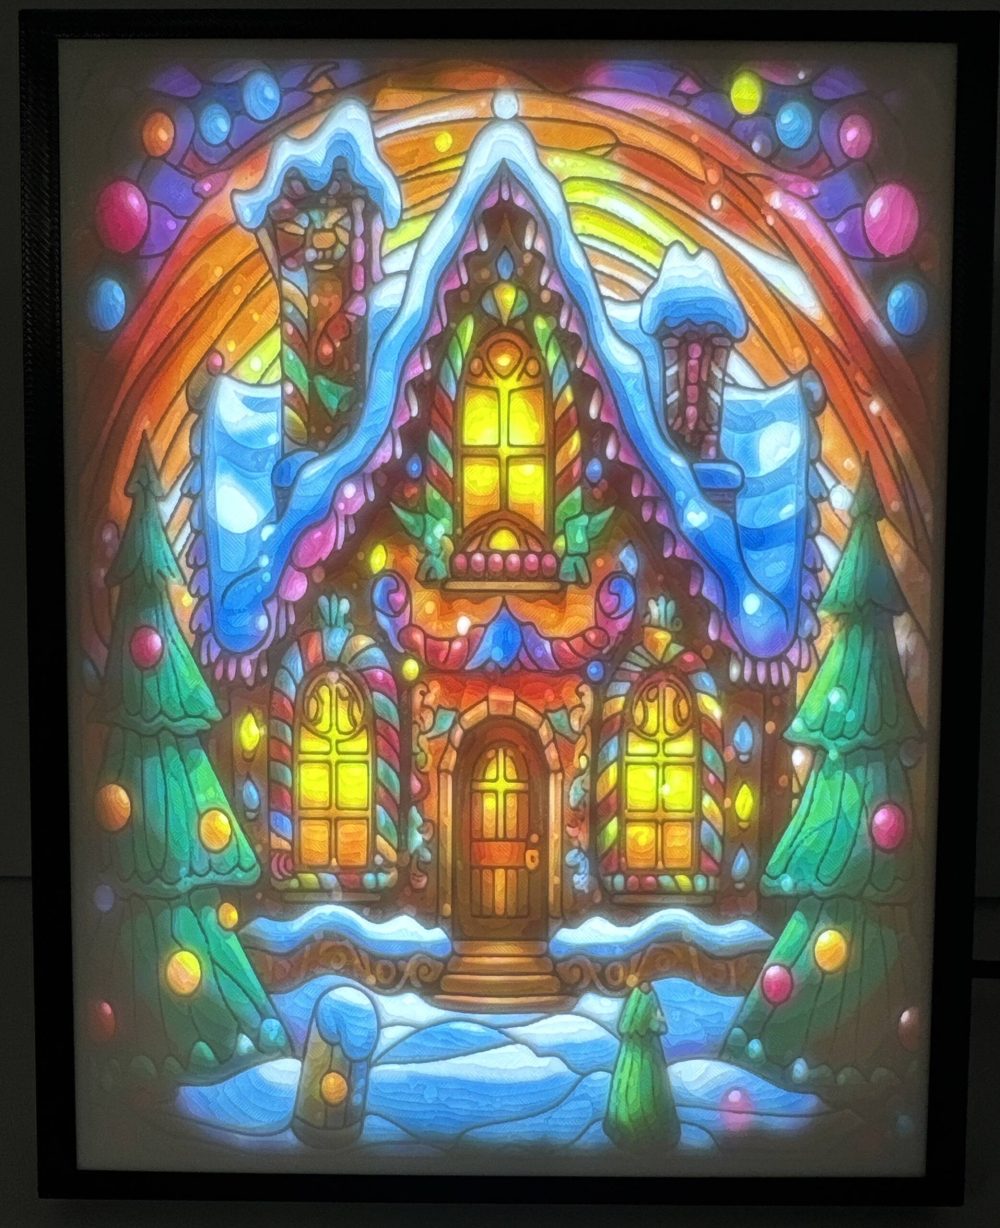 Colorful lighted lithophane of a gingerbread house with snowy roof and vibrant decorations.